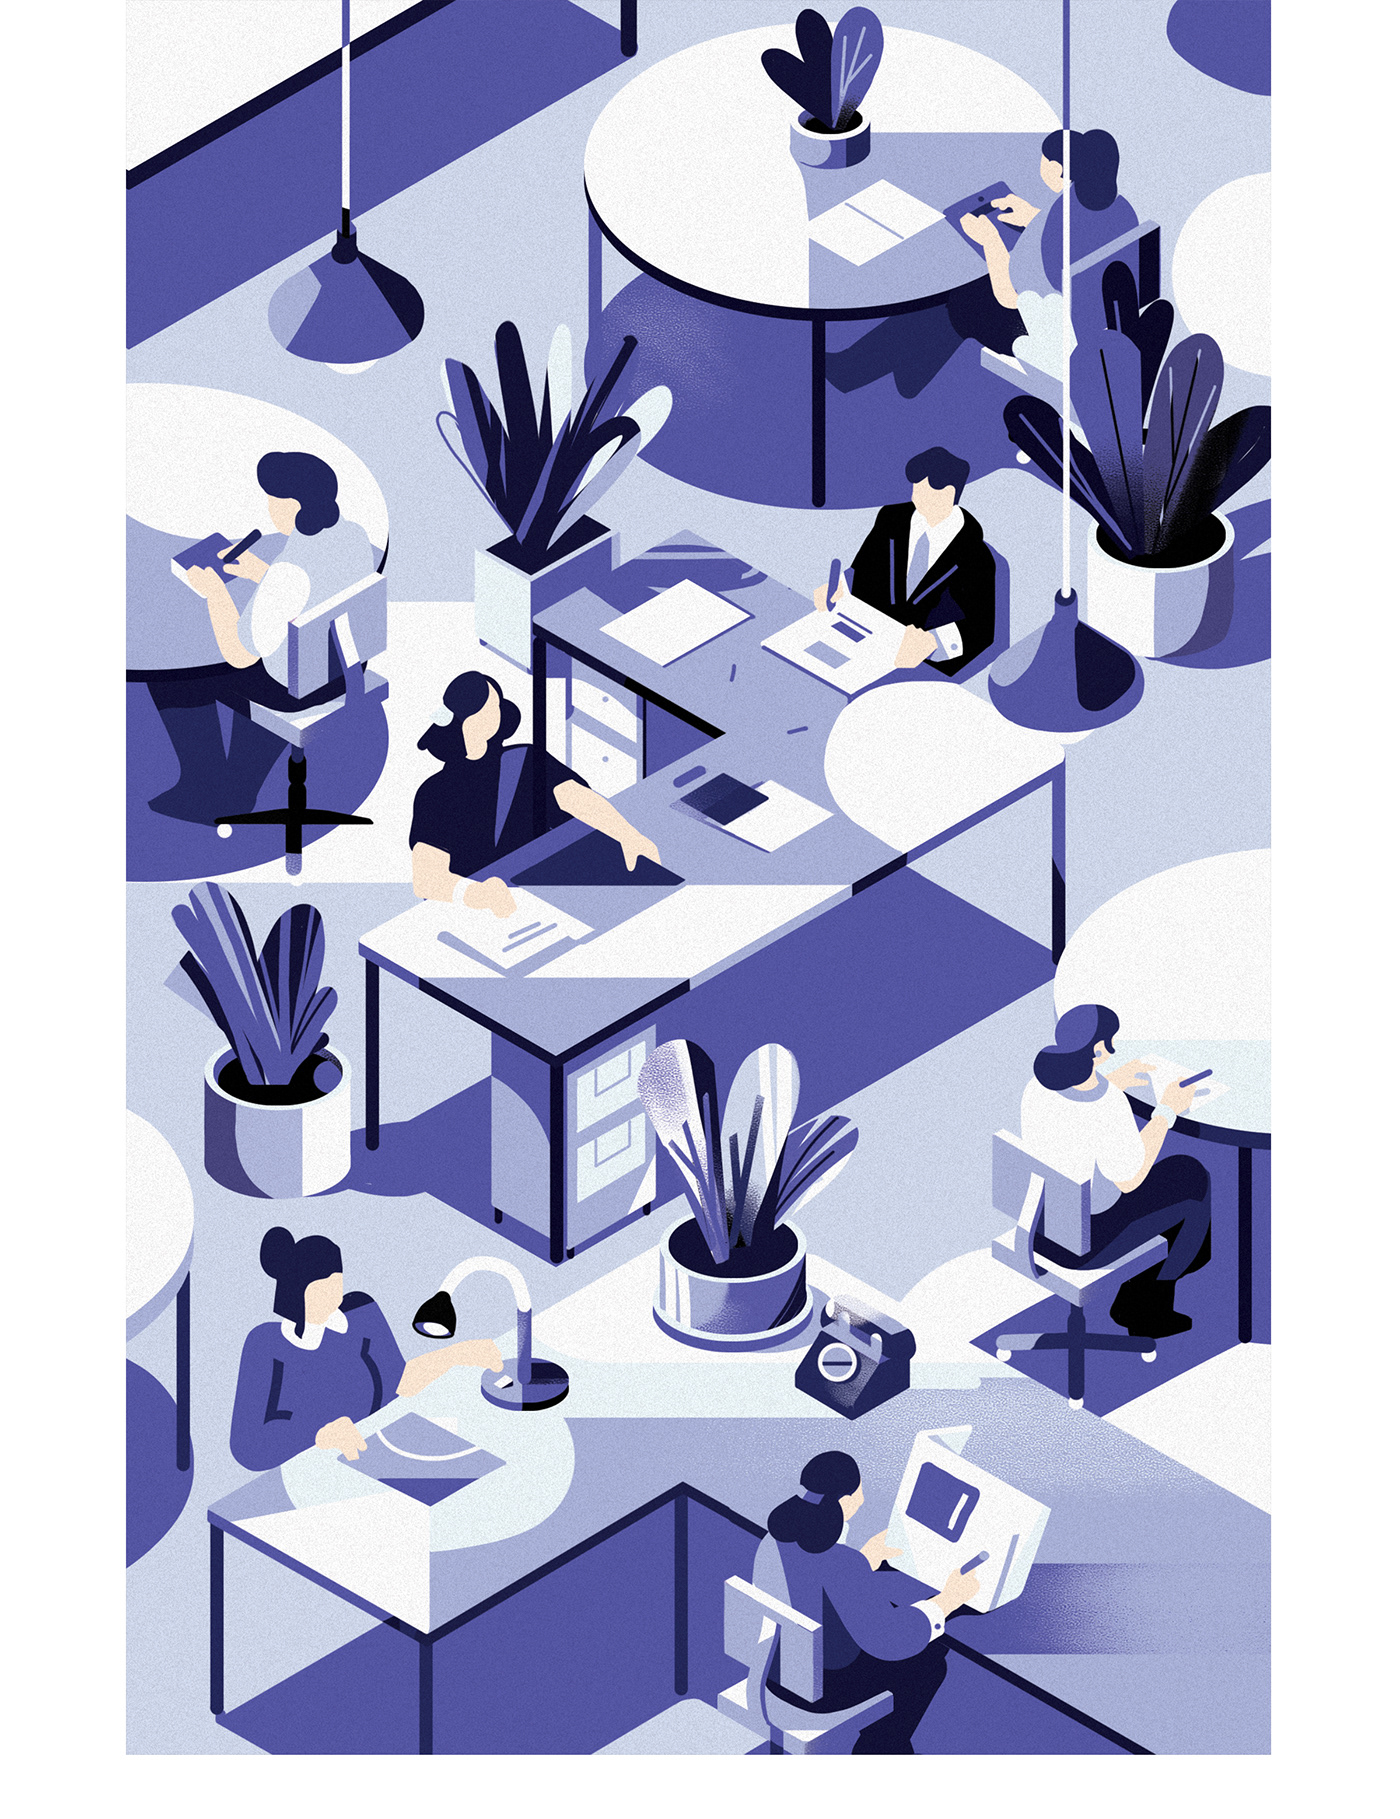 Character design  character illustration geometric ILLUSTRATION  Isometric Office Office layout Perspective remote working